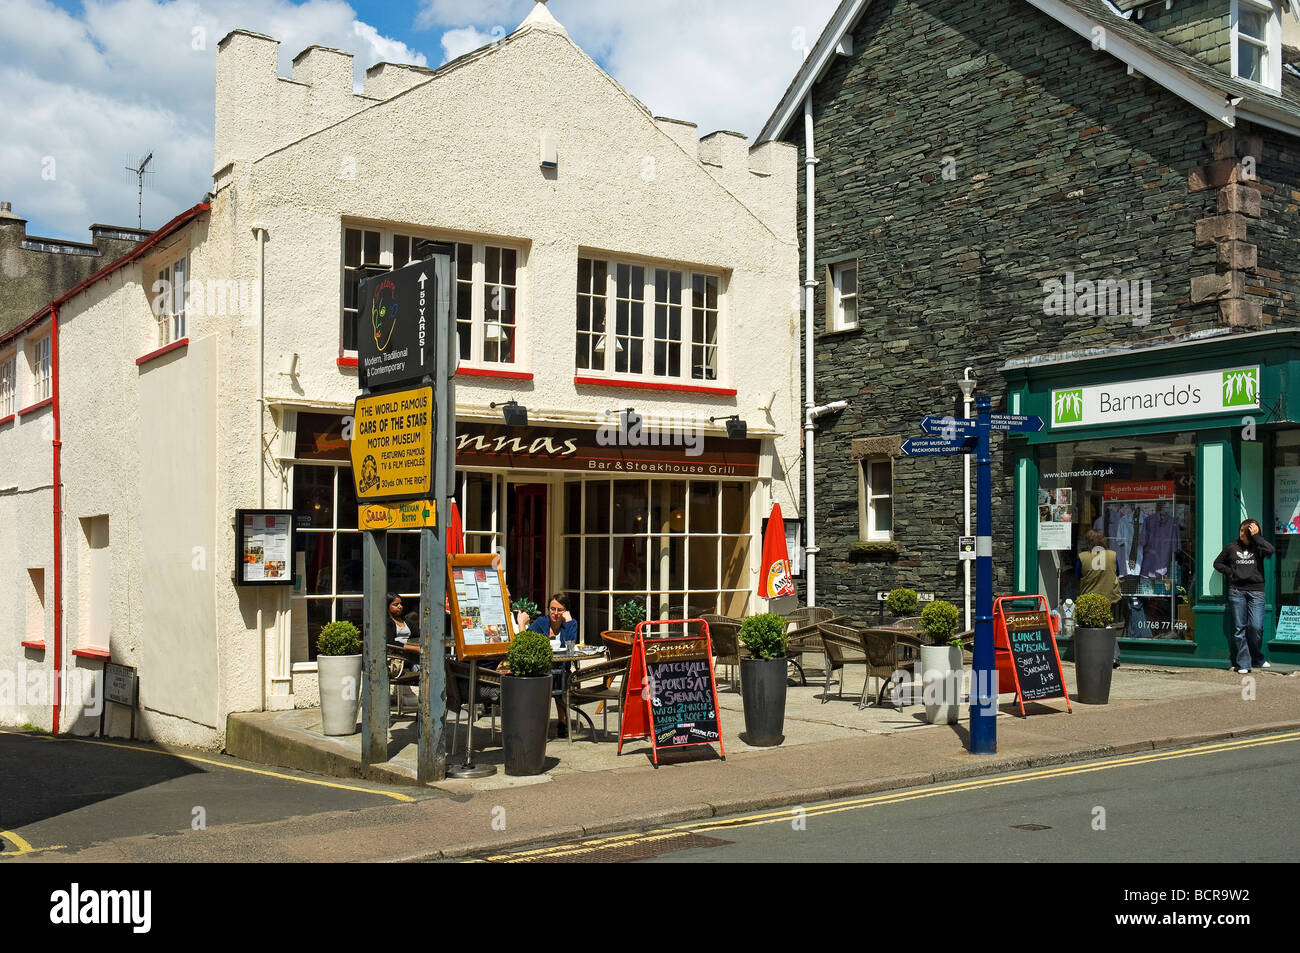 Diners People tourists visitors outside a bar pub in summer Keswick Cumbria England UK United Kingdom GB Great Britain Stock Photo